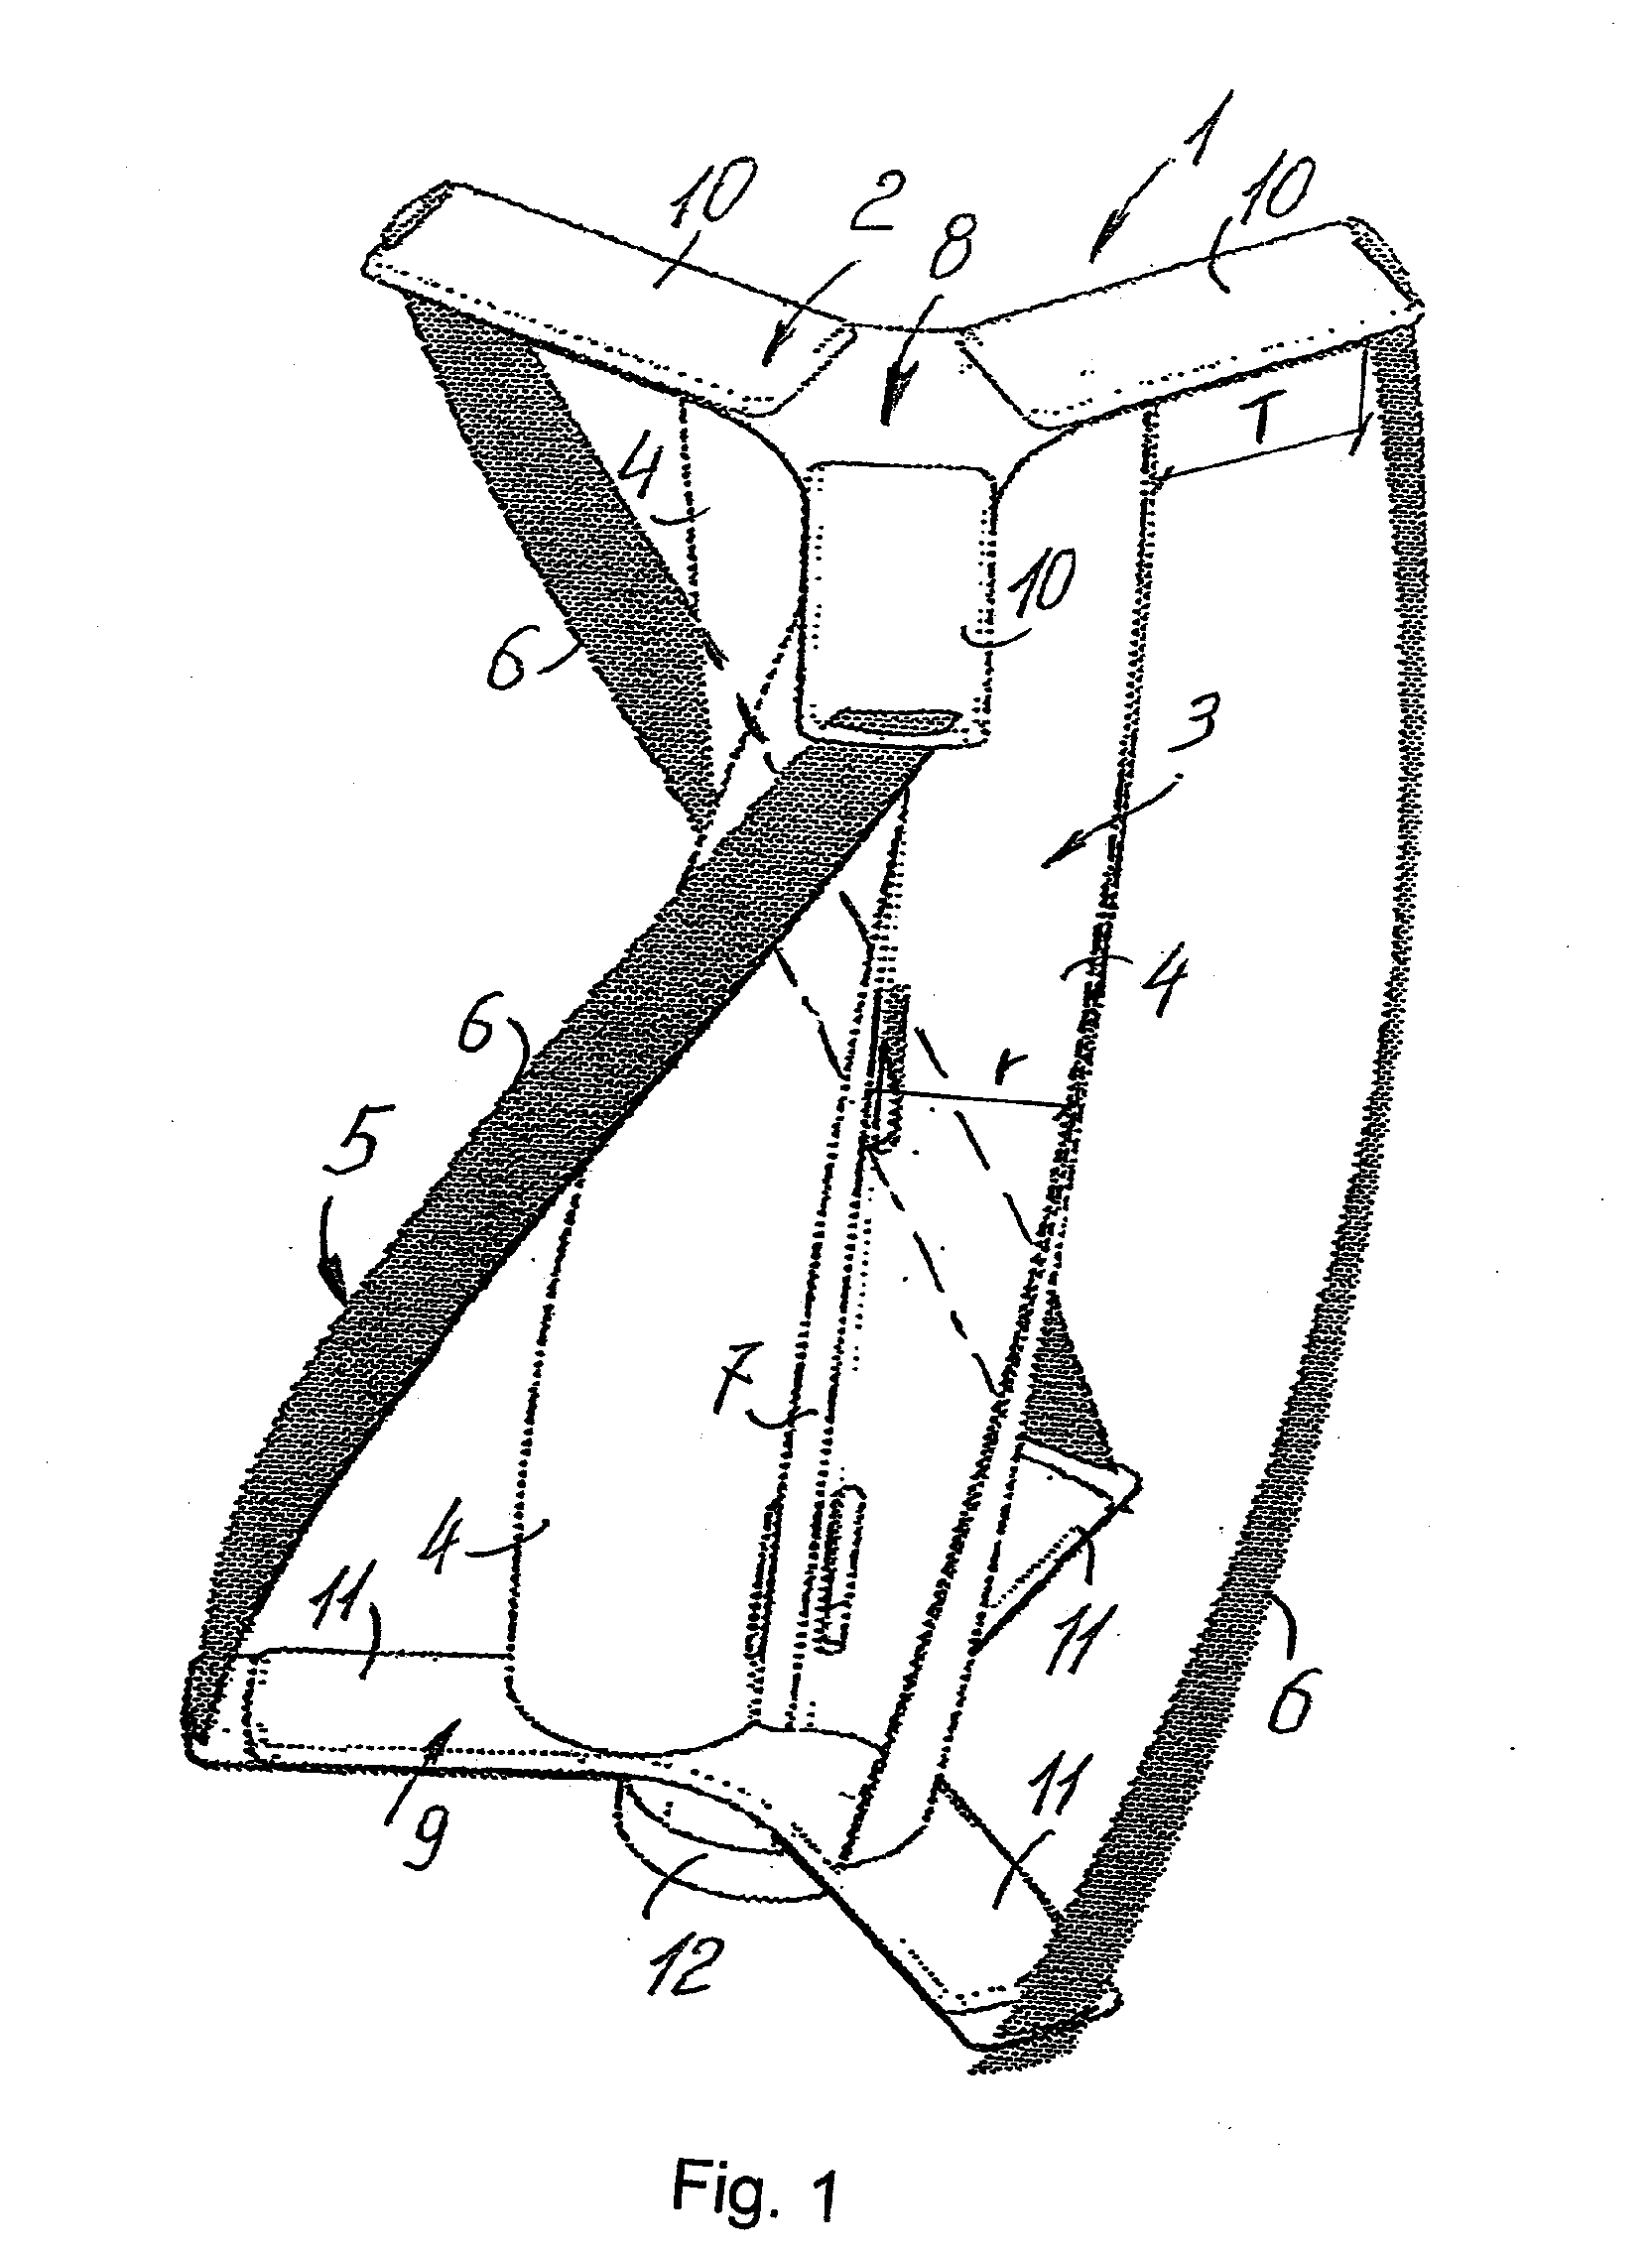 Hybrid type vertical shaft turbine for wind power generating devices